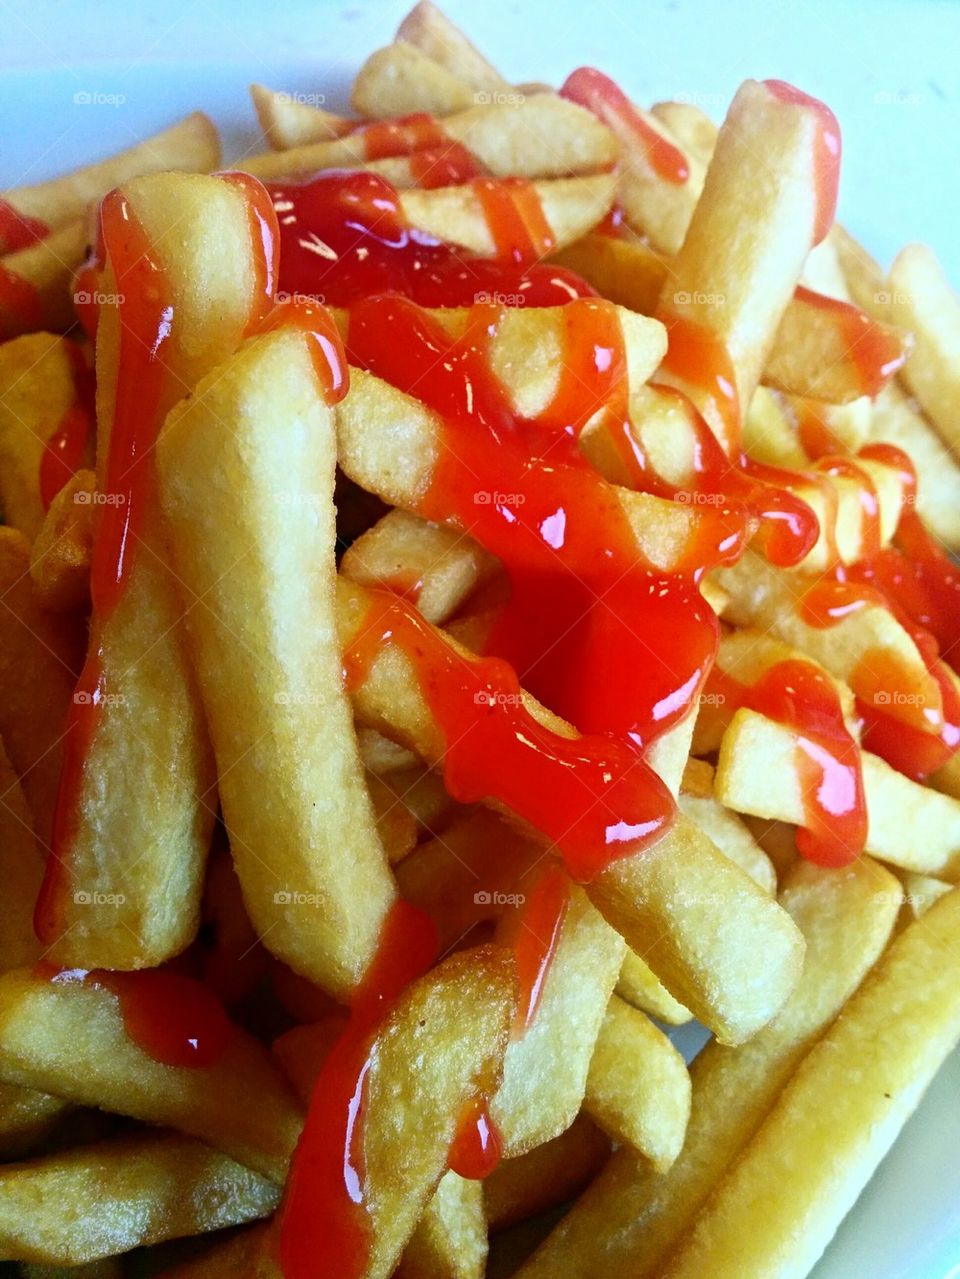 chips and tomato sauce